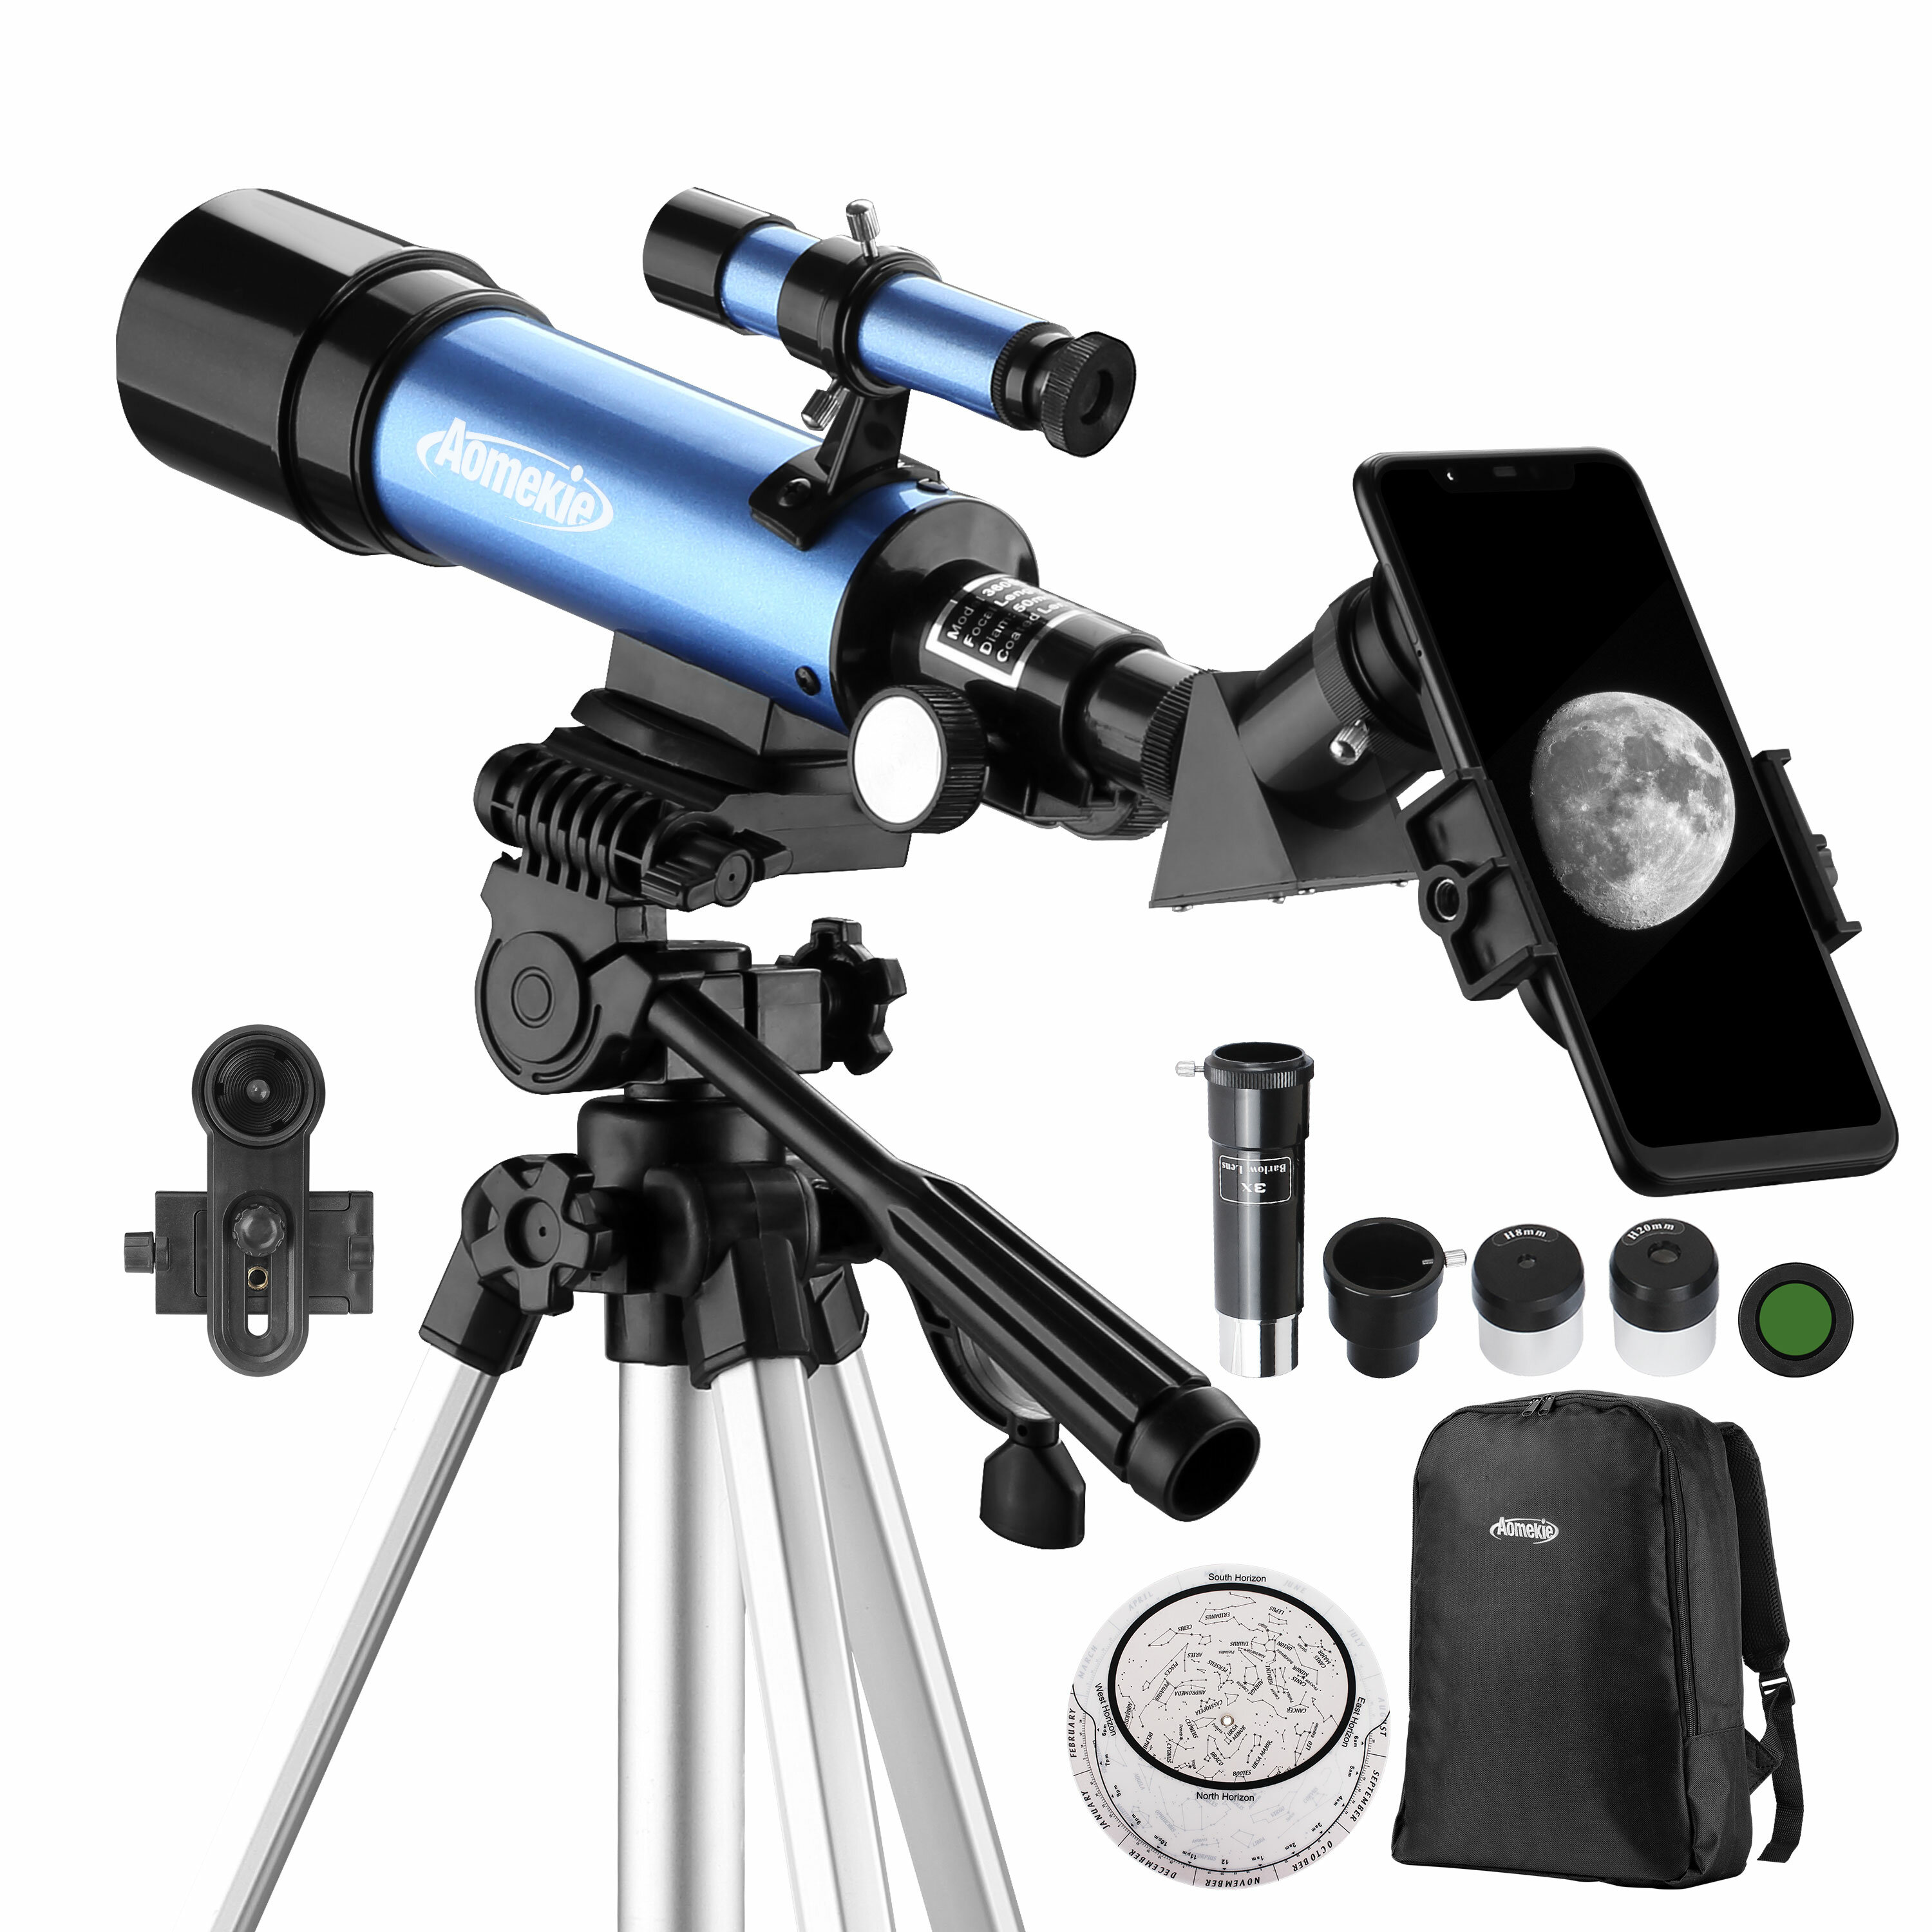 [US Direct] AOMEKIE 18X-135X Astronomical Telescope 50mm Aperture Refractor Telescopes with Phone Adapter & Adjustable Tripod for Astronomy Beginners AO2013